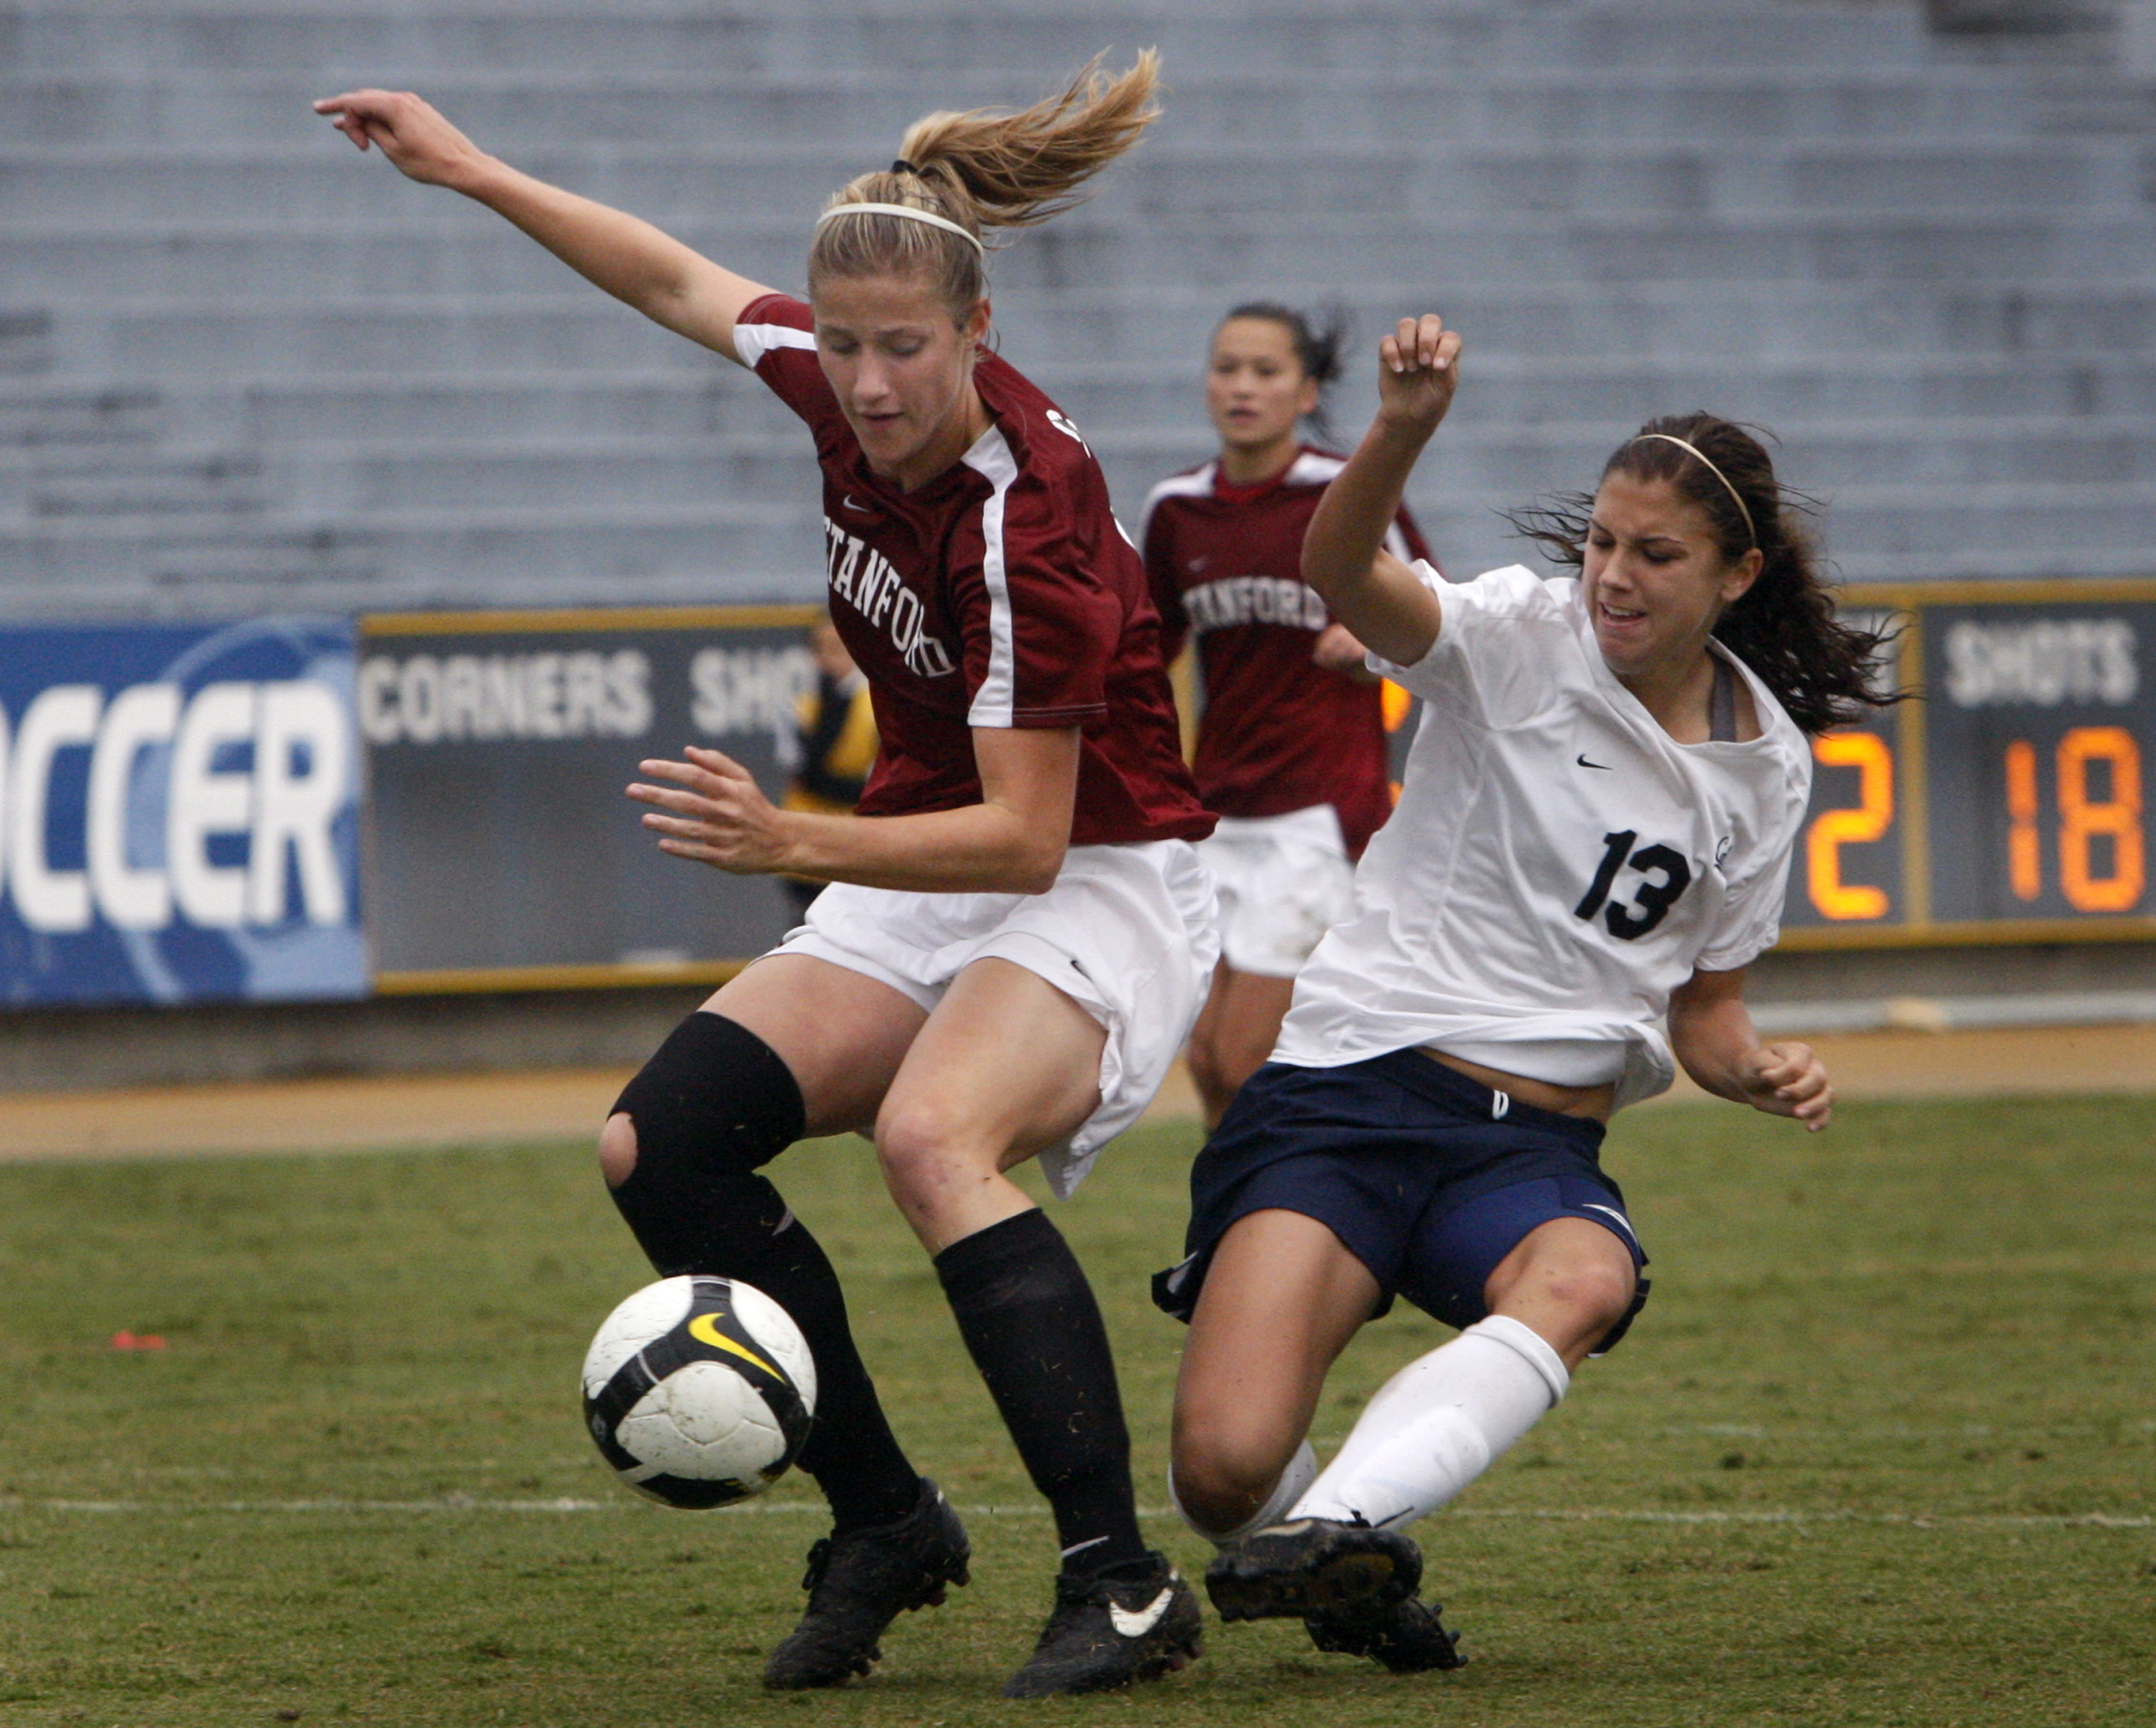 Cal’s Alex Morgan (13) takes a shot on goal against Allison Falk and the Stanford Cardinal in a women’s soccer game at Edwards Stadium in Berkeley, Calif., on Saturday, Nov. 8, 2008